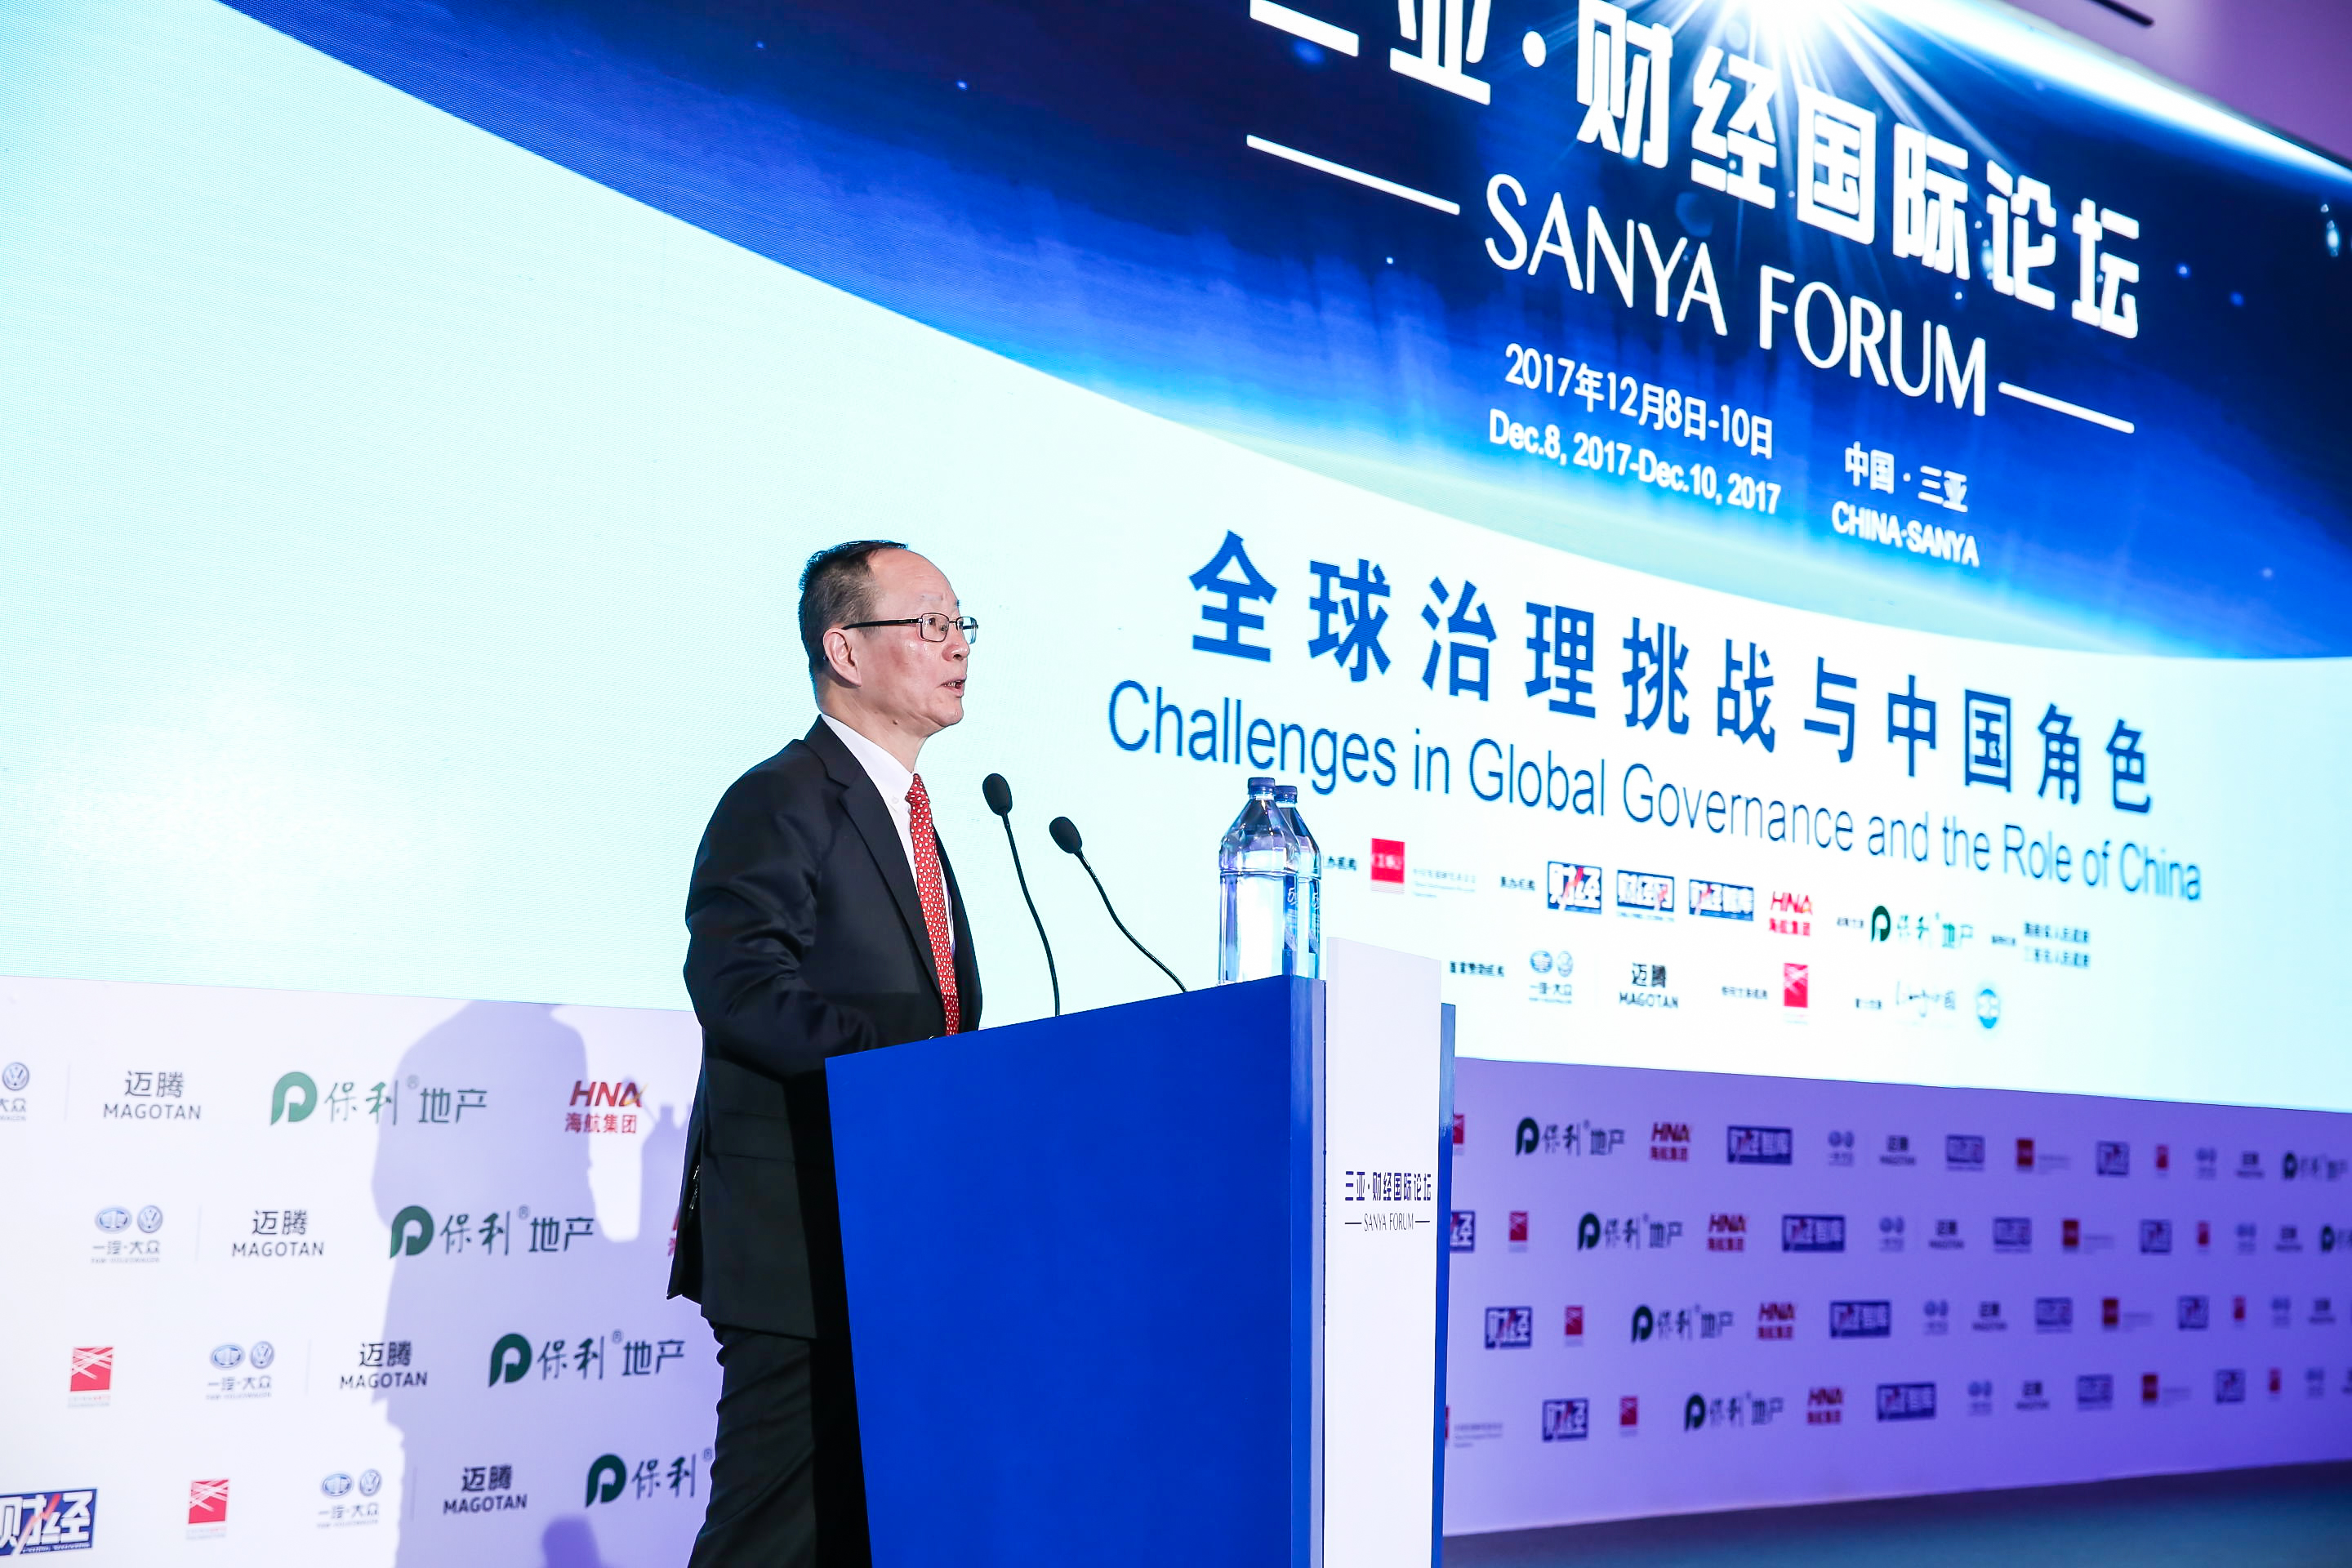  Wang Yiming, vice minister of Development Research Center of the State Council delivers a keynote speech at the opening ceremony of the Sanya Forum 2017 in Sanya, Hainan Province on Dec. 9. [Photo provided to China.org.cn]